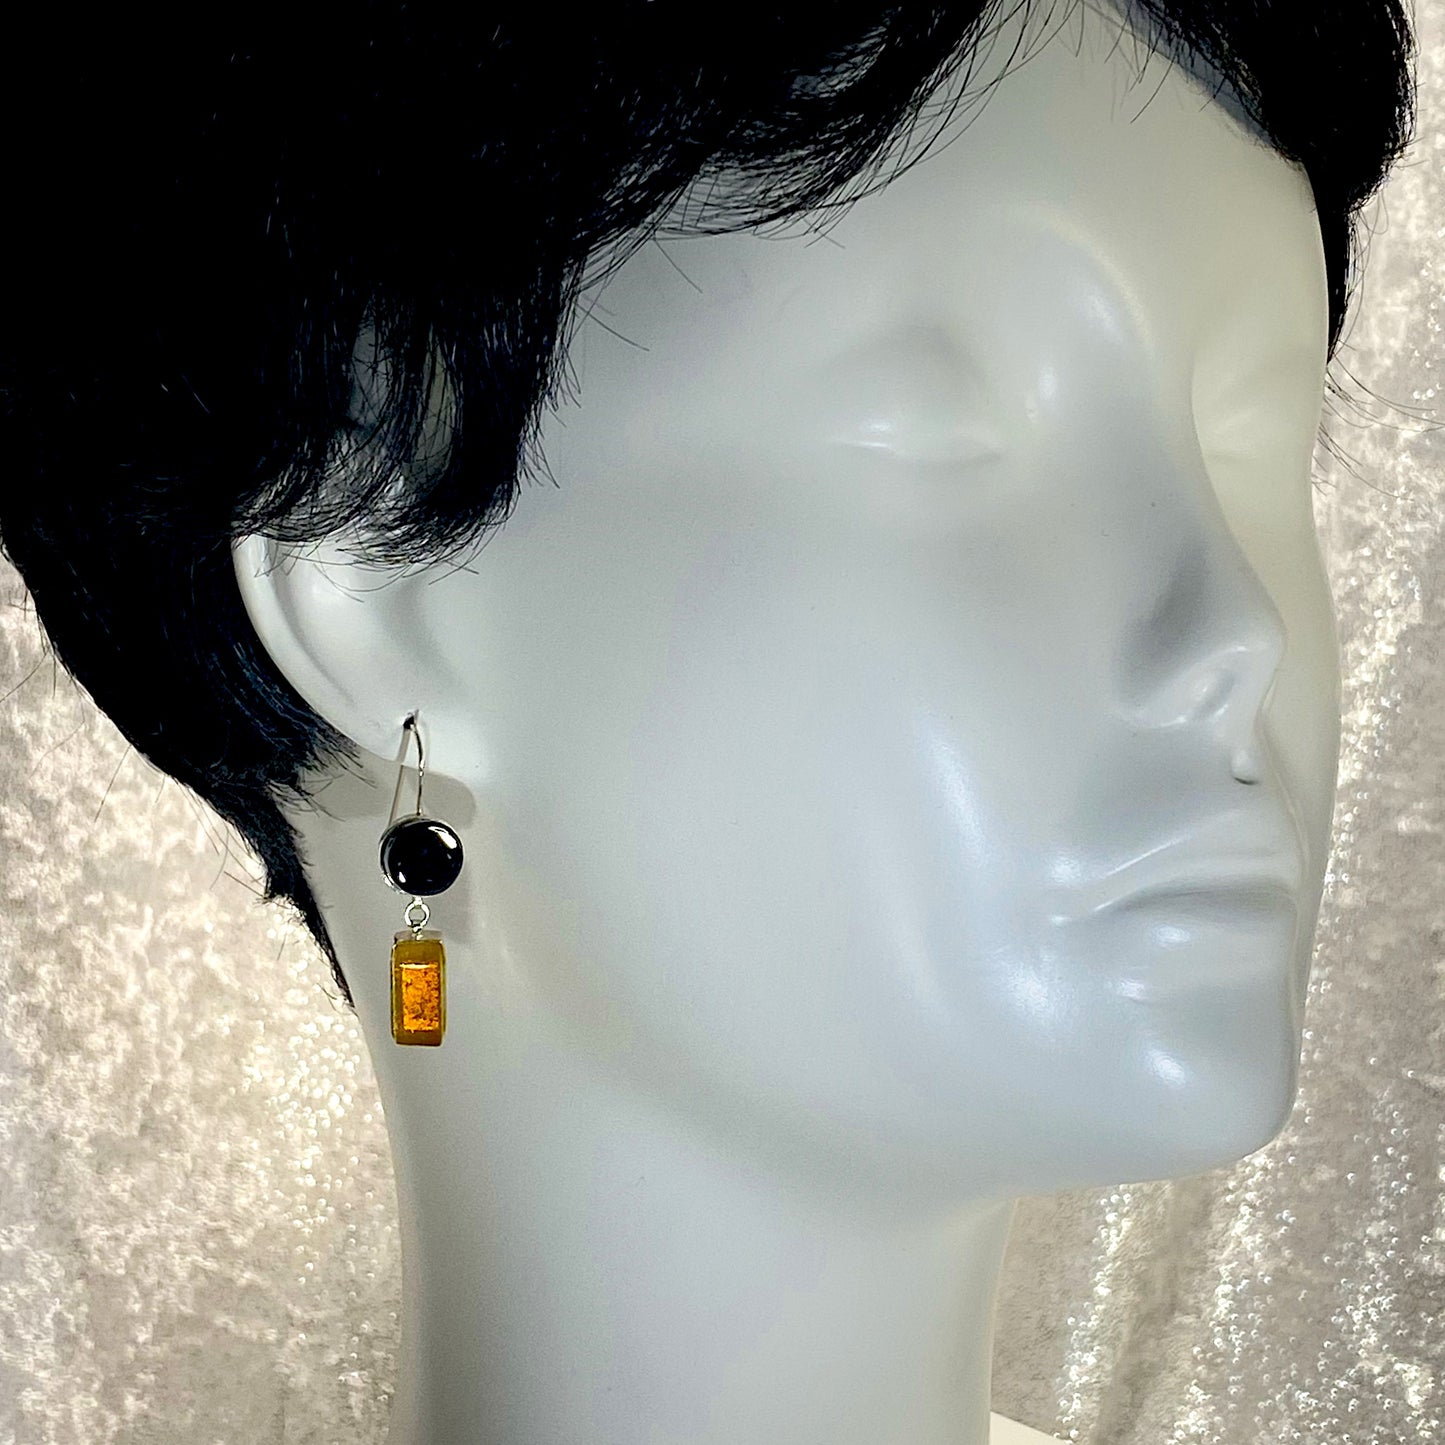 double drop earrings, black, yellow, fused glass, glass jewelry, glass and silver jewelry, handmade, handcrafted, American Craft, hand fabricated jewelry, hand fabricated jewellery, Athen, Georgia, colorful jewelry, sparkle, bullseye glass, dichroic glass, art jewelry